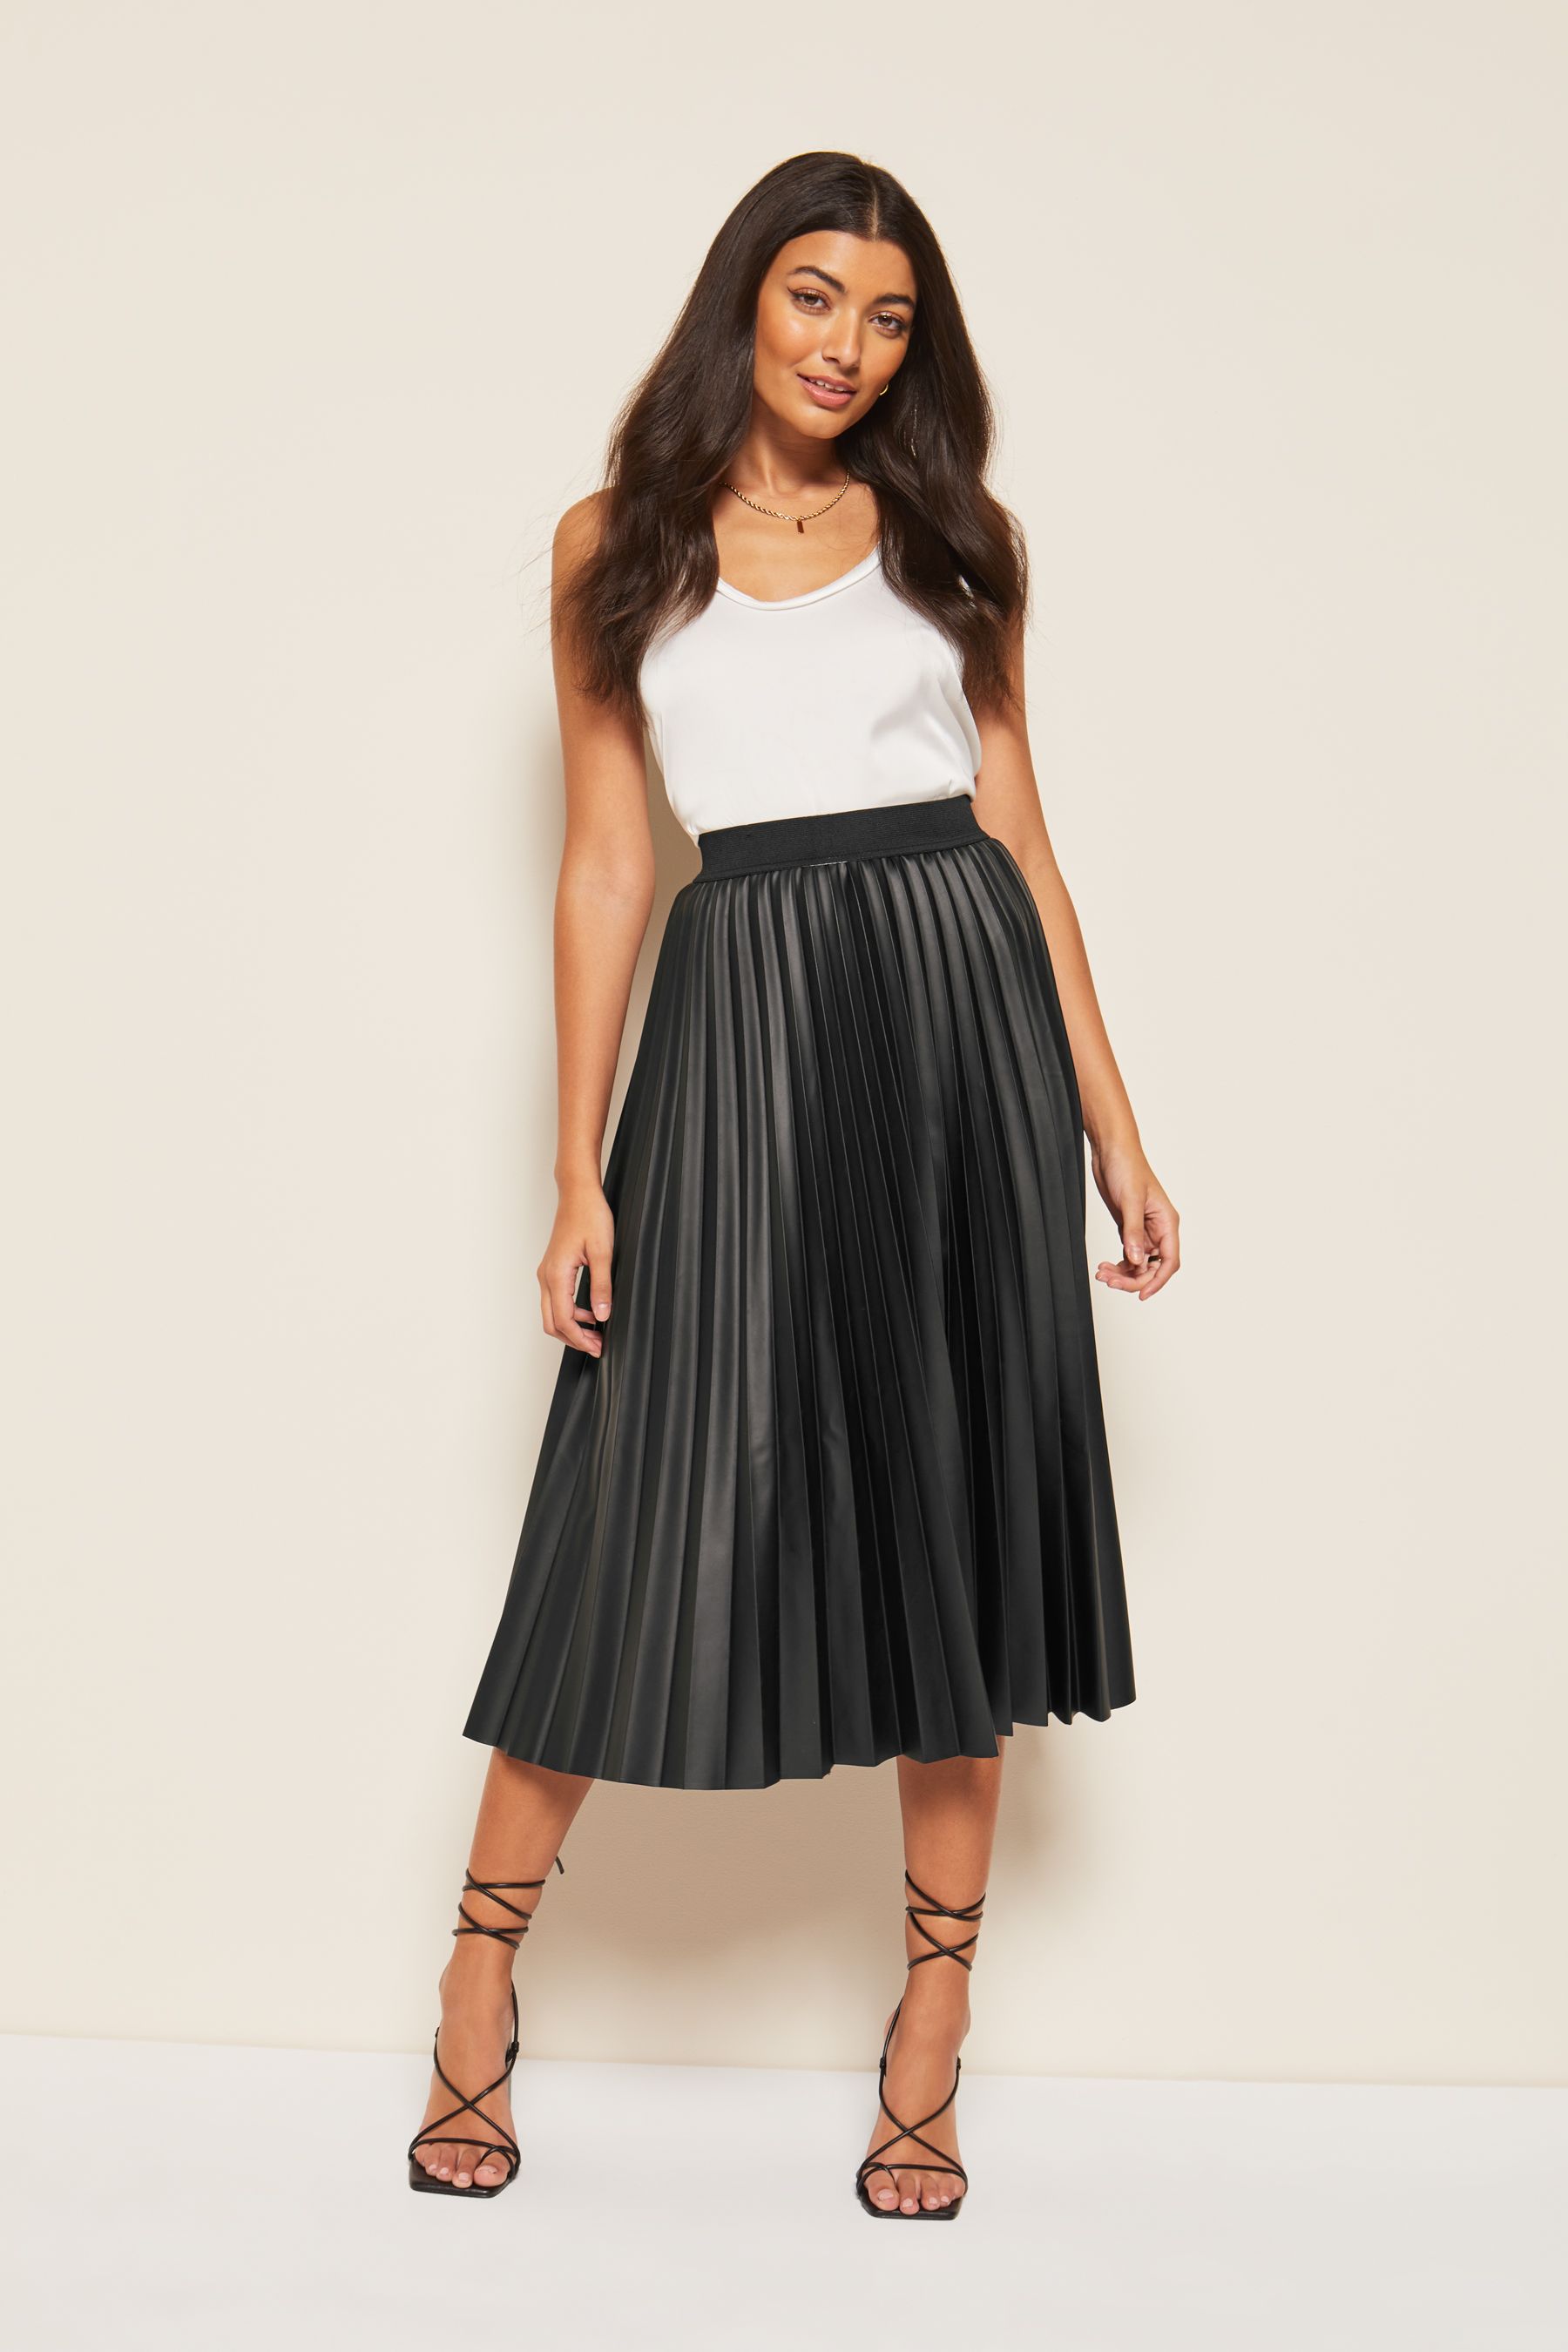 Buy Friends Like These Black Faux Leather Pleat Summer Midi Skirt from ...